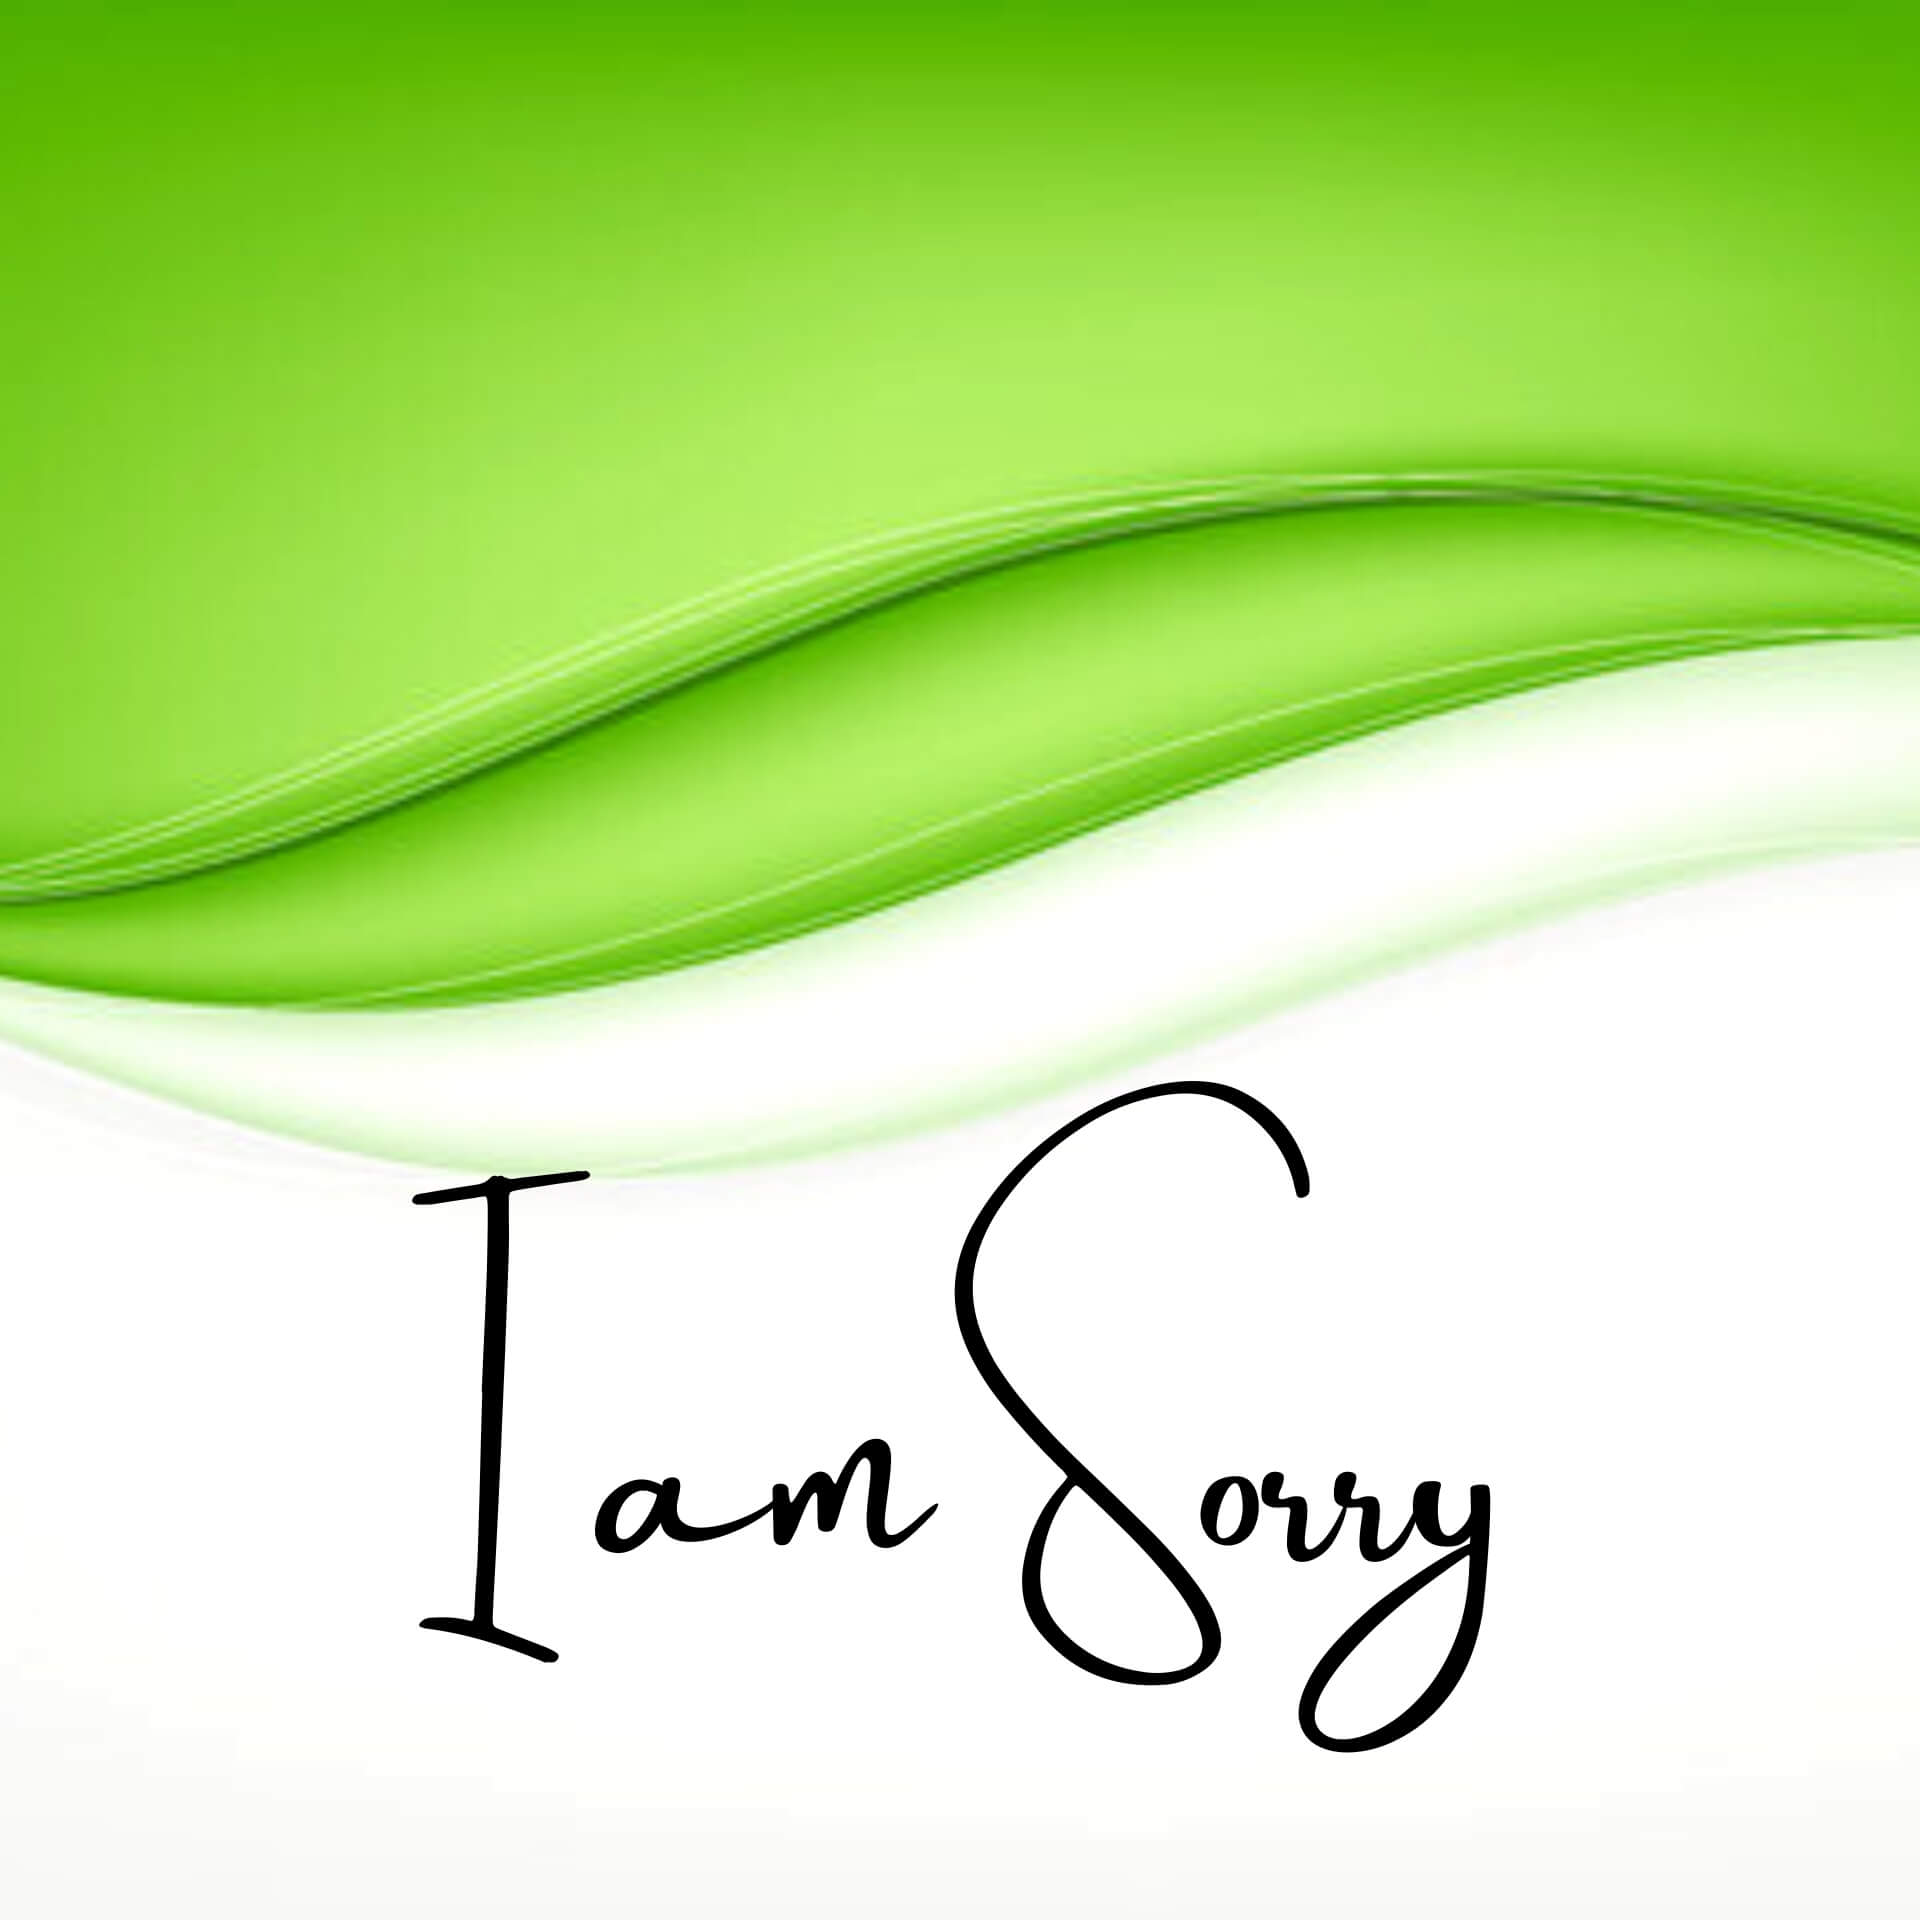 Sorry Wallpaper Images HD Download